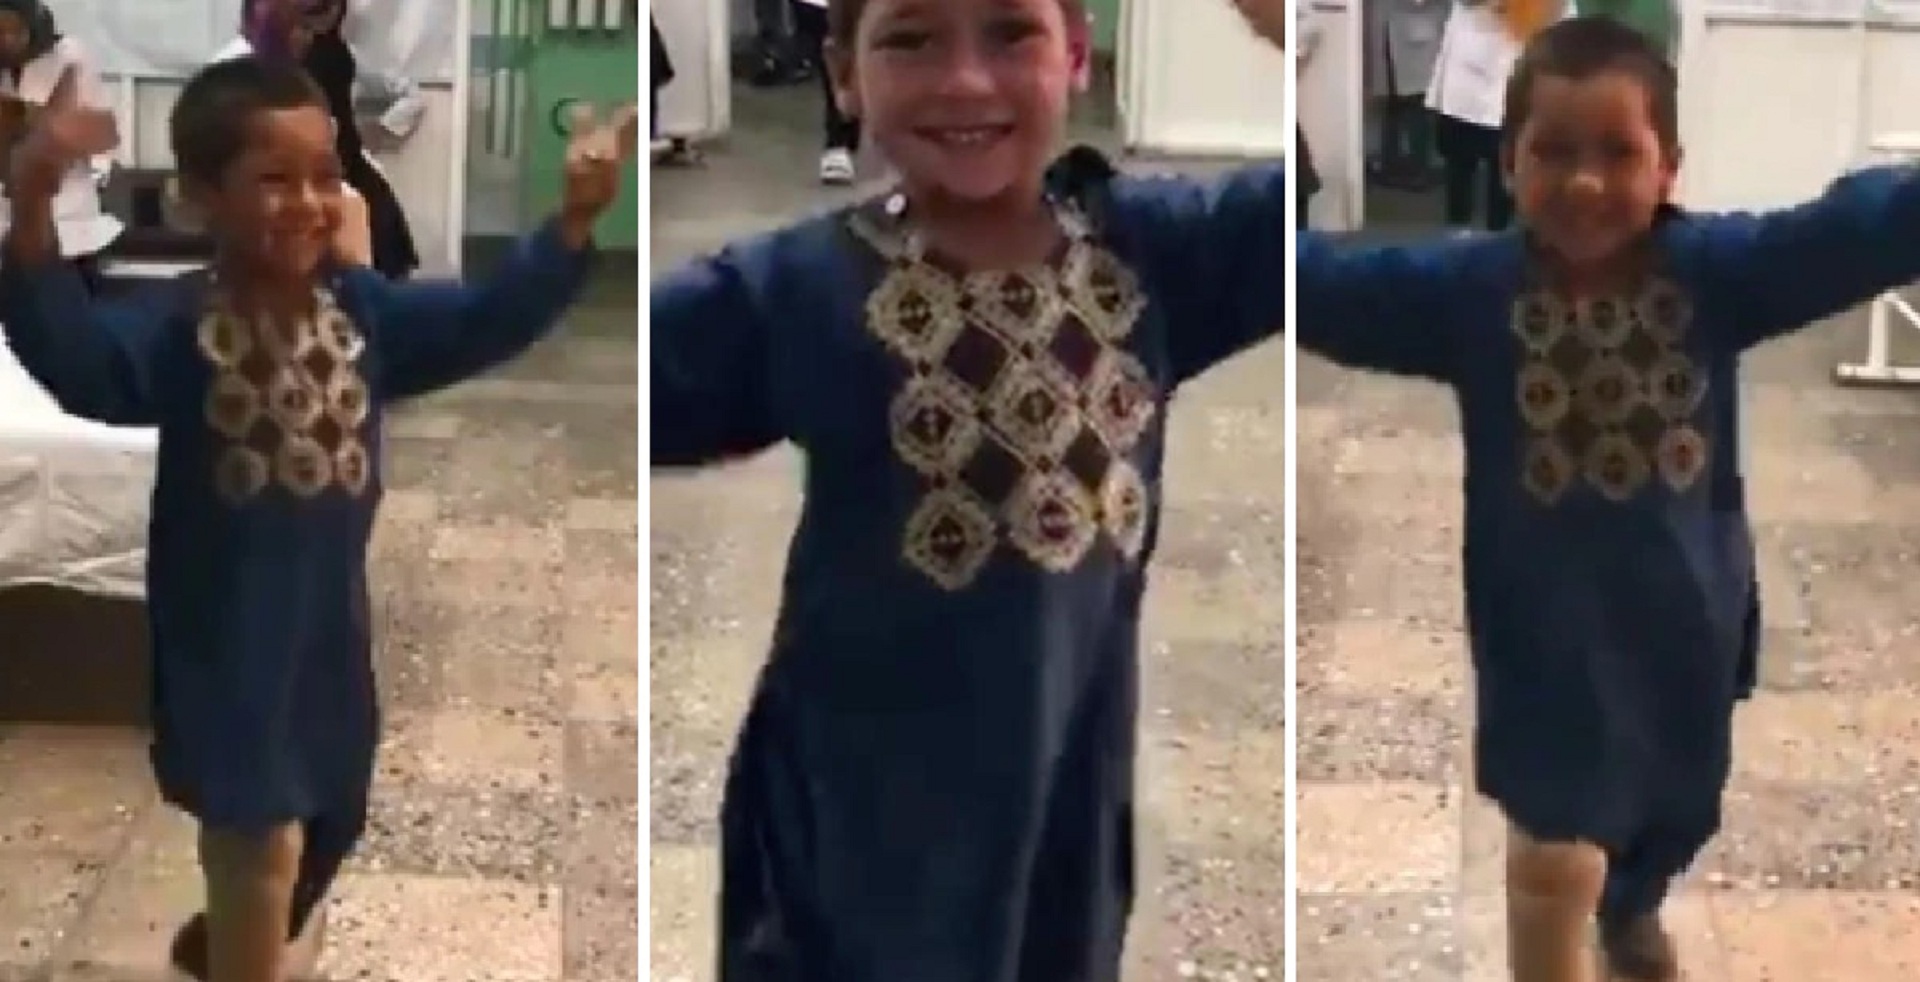 Afghan Boy Who Lost His Leg In Explosion Dances With Joy After Prosthetic Leg Placement!